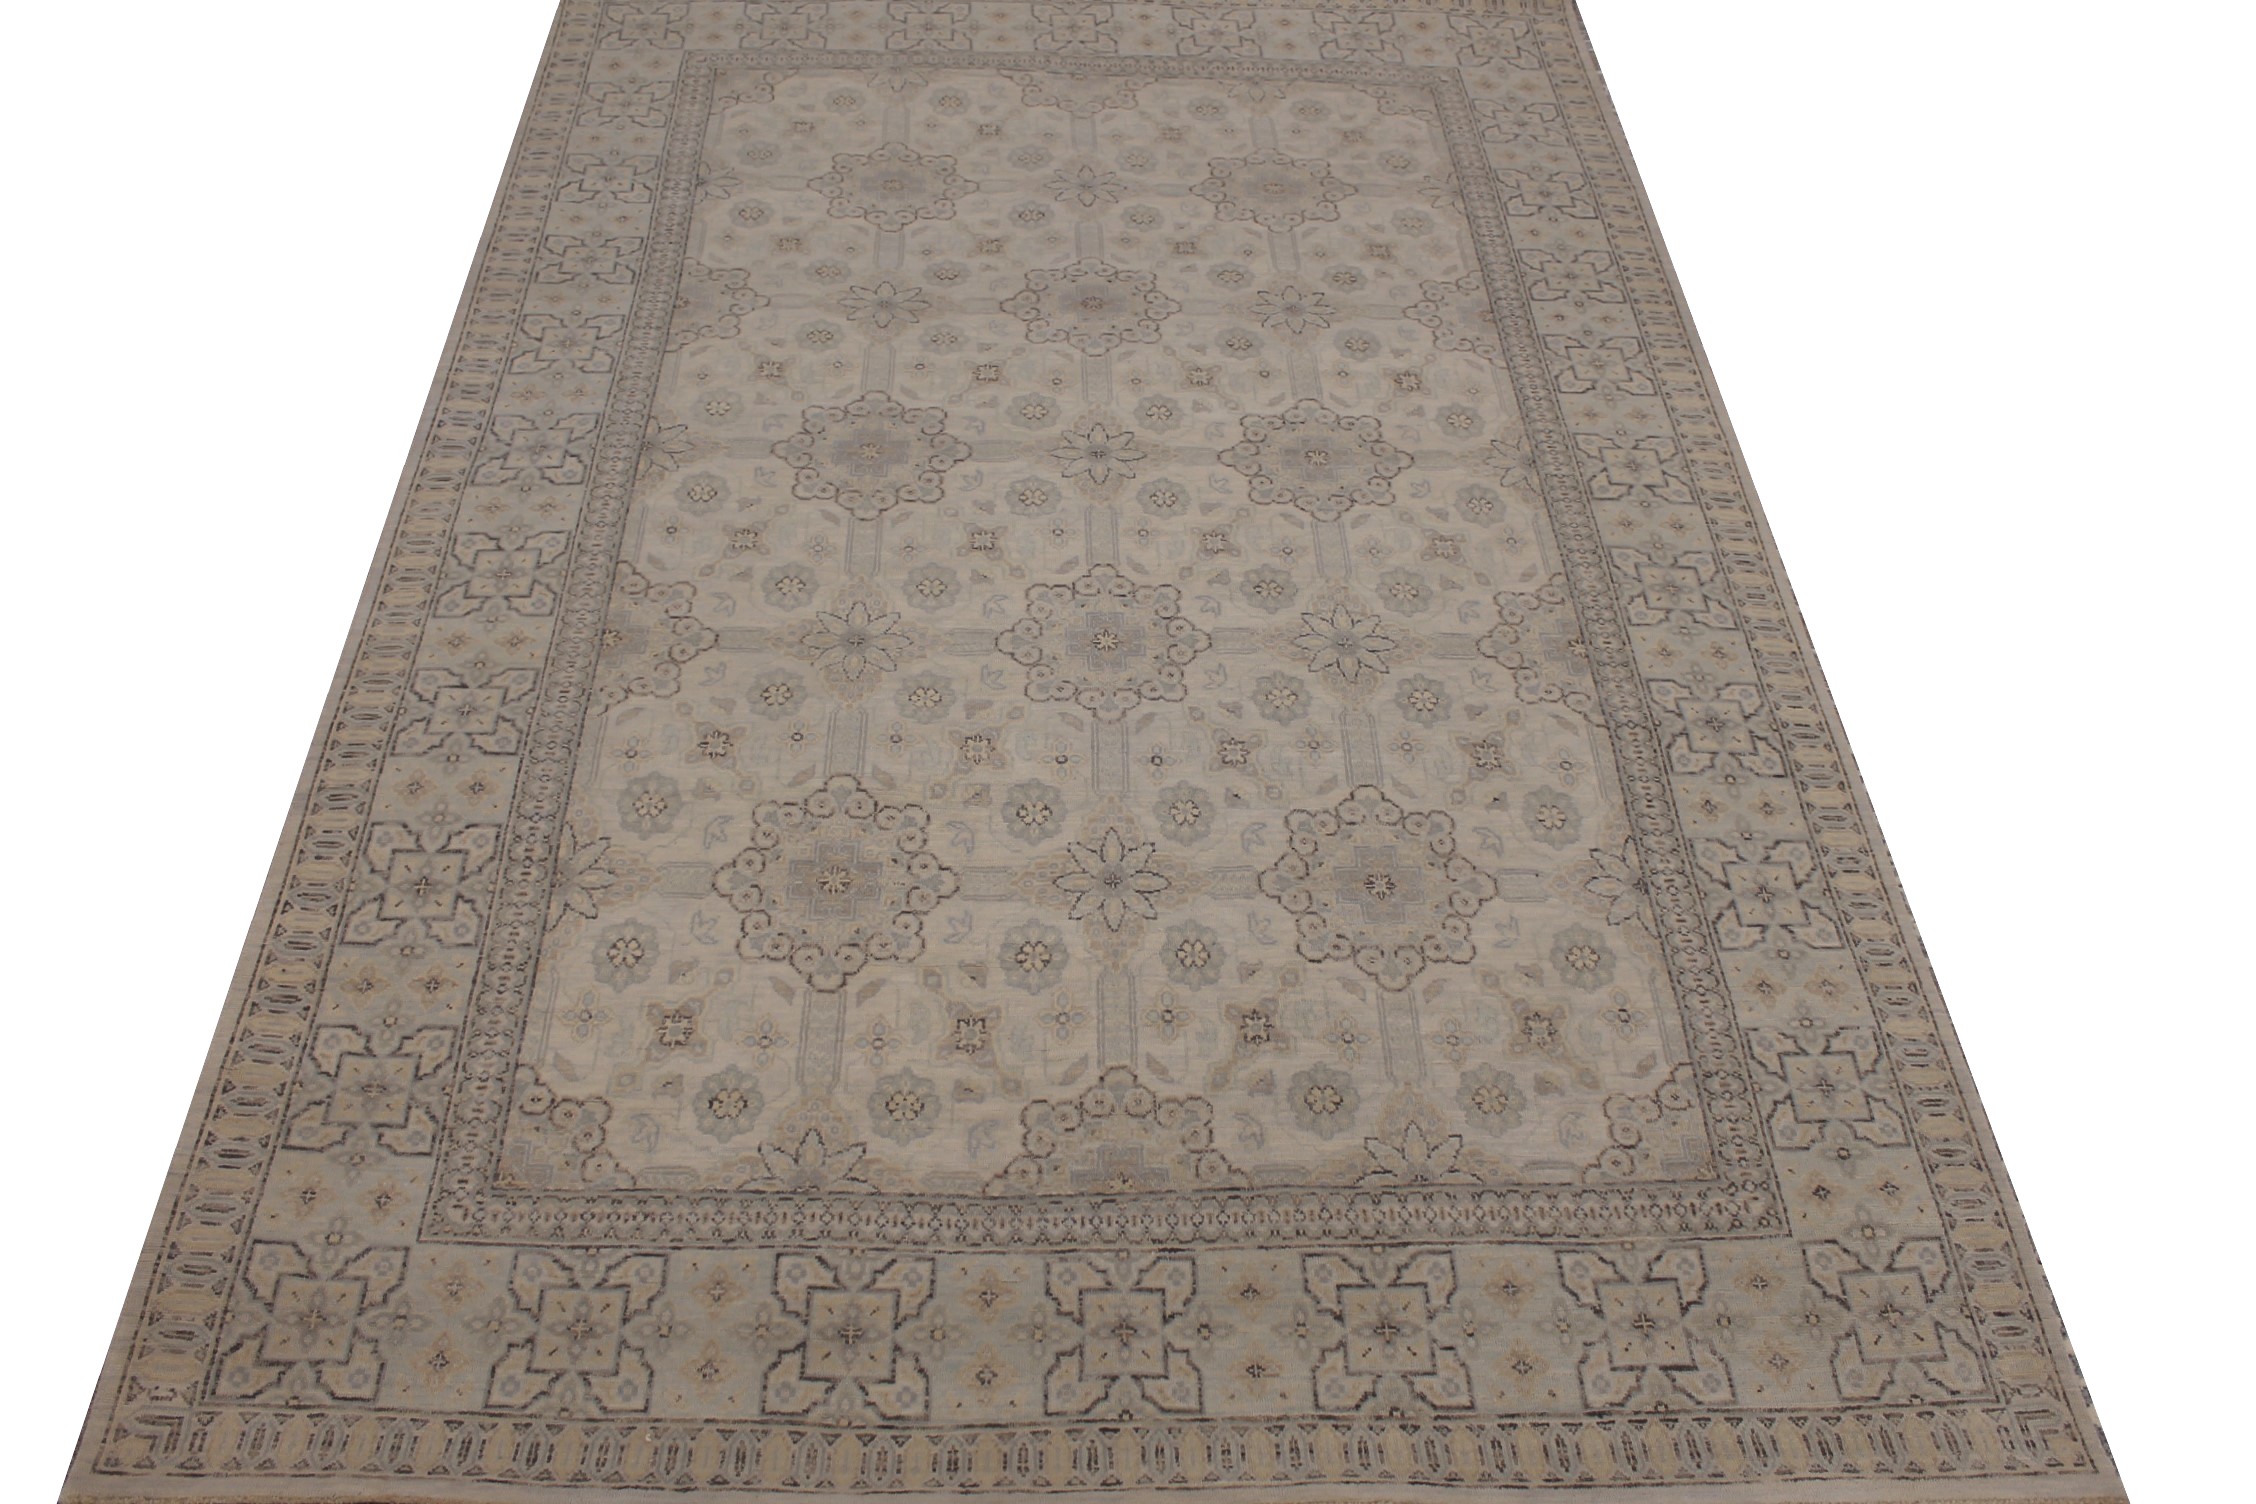 6x9 Aryana & Antique Revivals Hand Knotted Wool Area Rug - MR027458